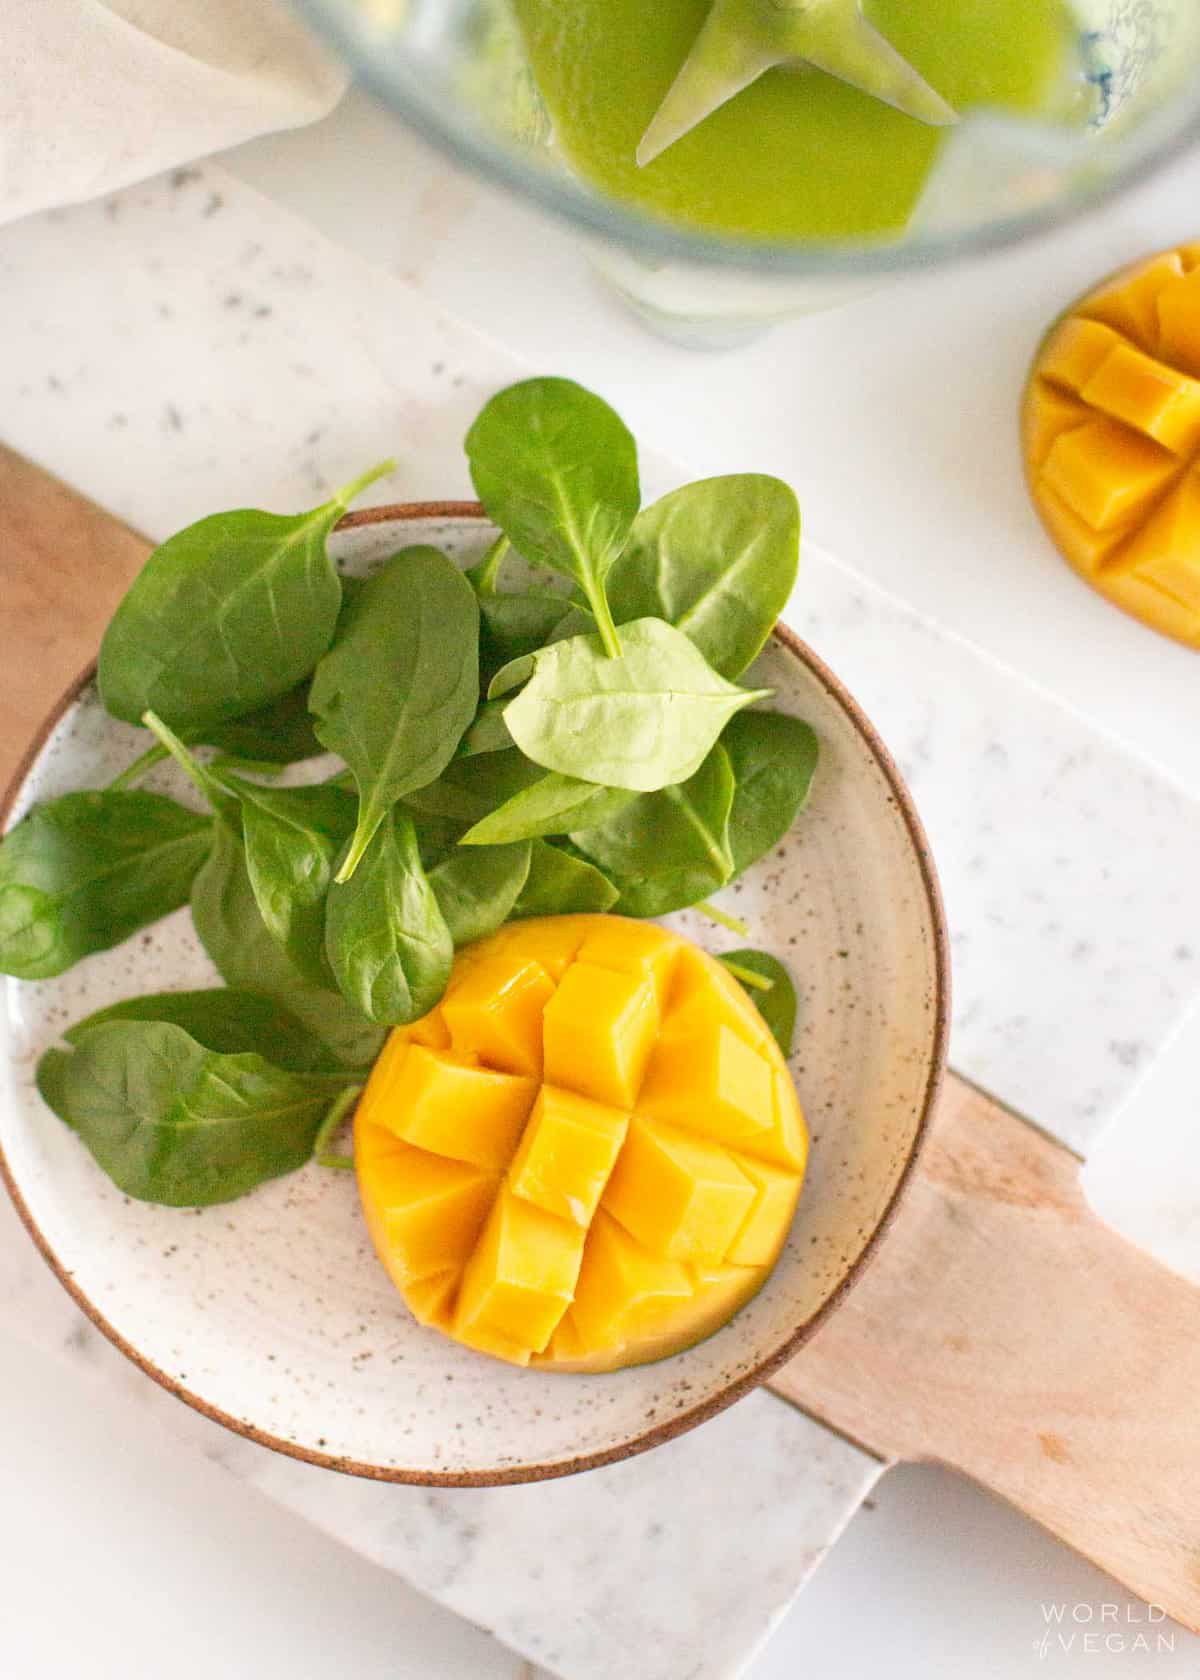 A cut mango and spinach leaves on a plate.